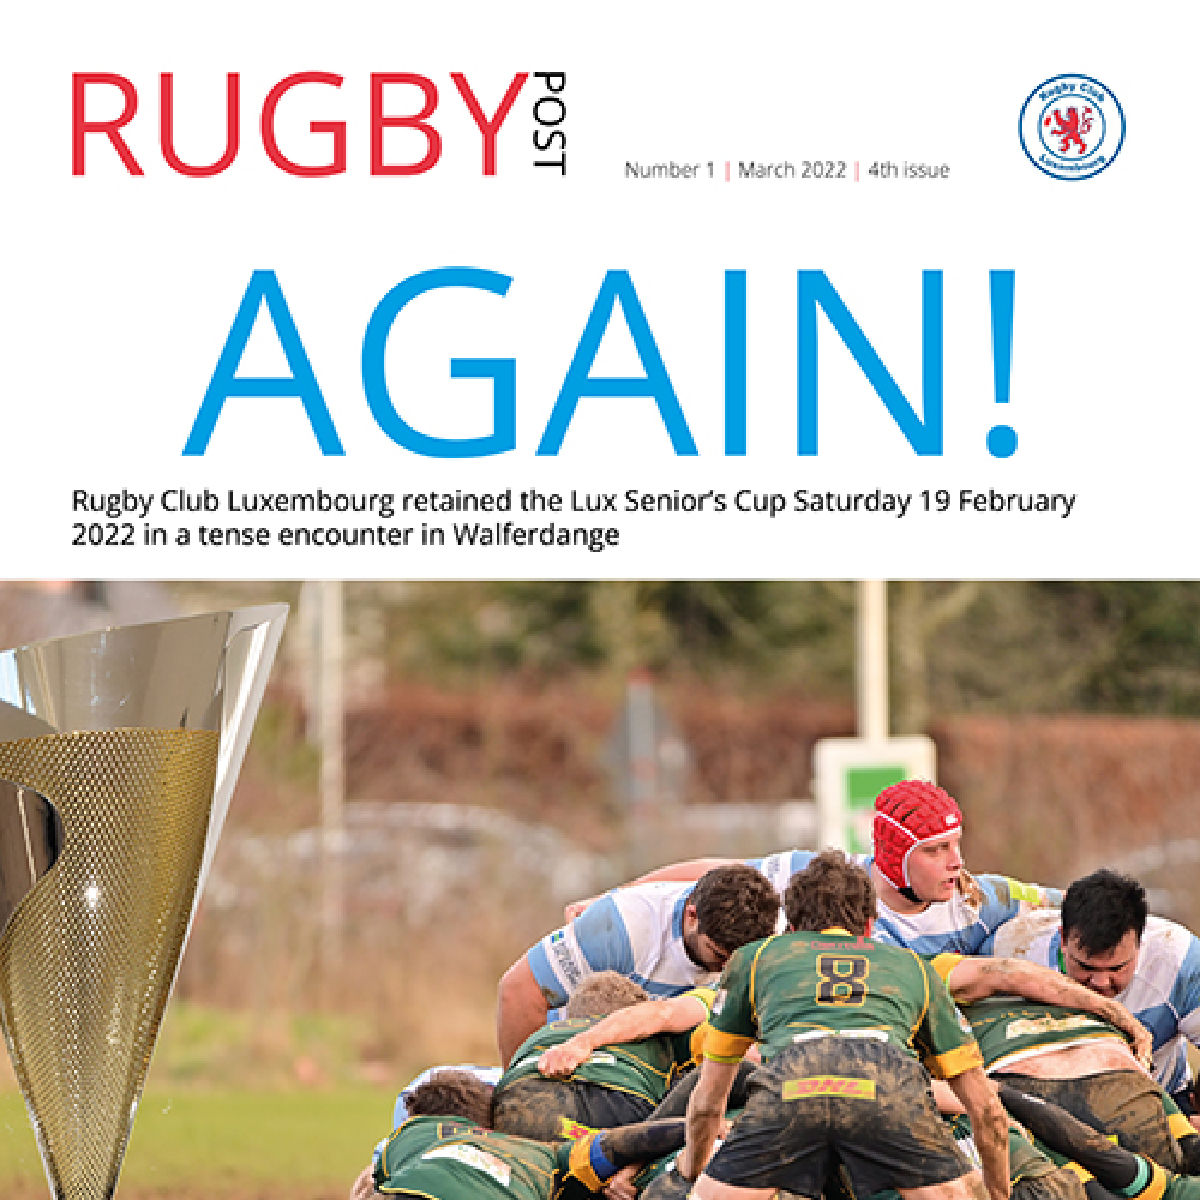 The new RUGBY POST is out!